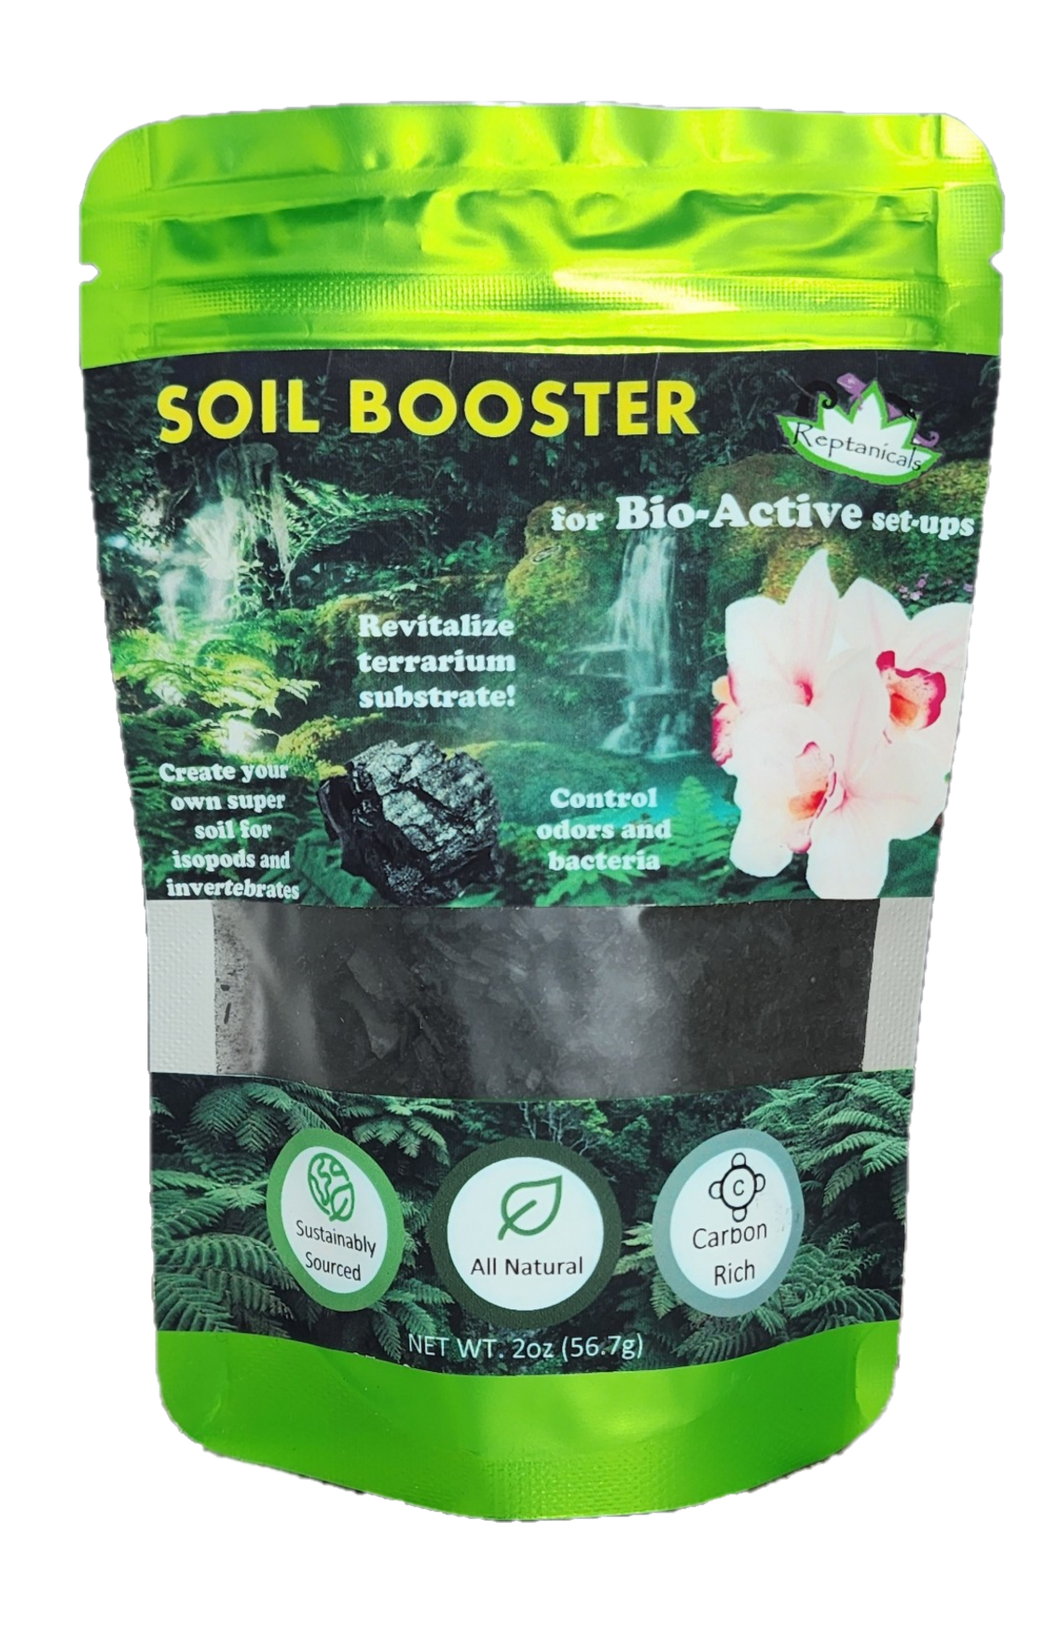 Reptanicals Soil Booster for bioactive setups